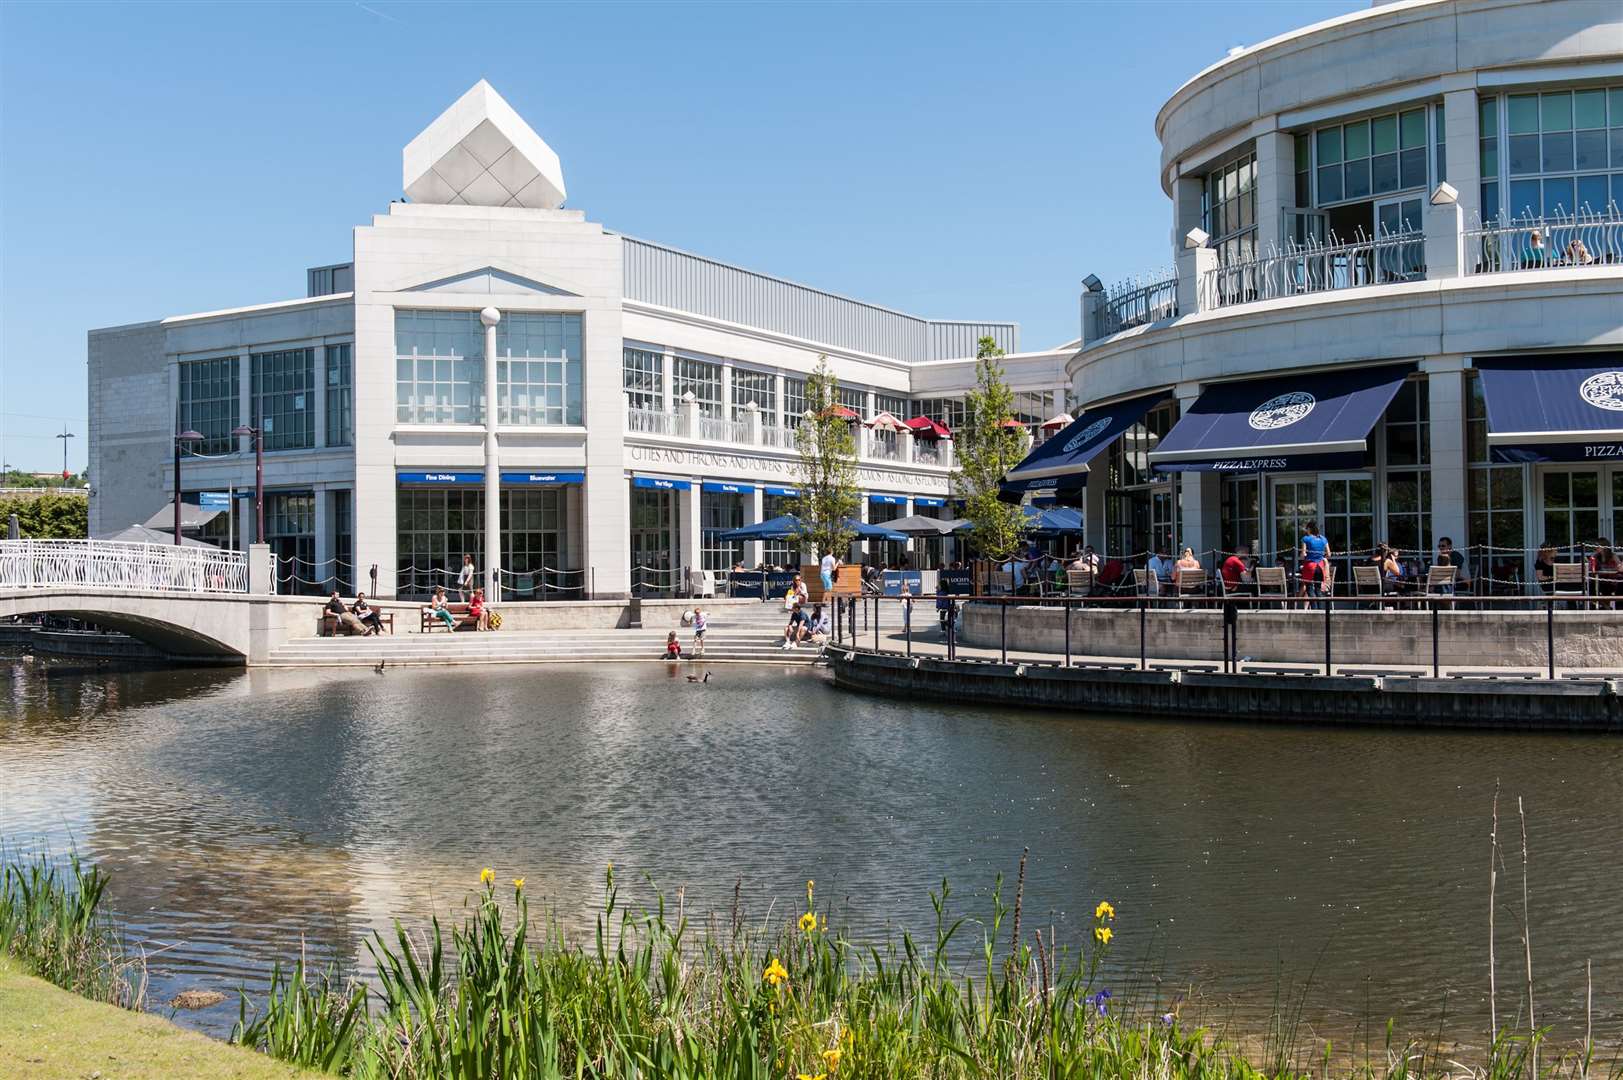 The terrorist group planned to target Bluewater in one of their attacks